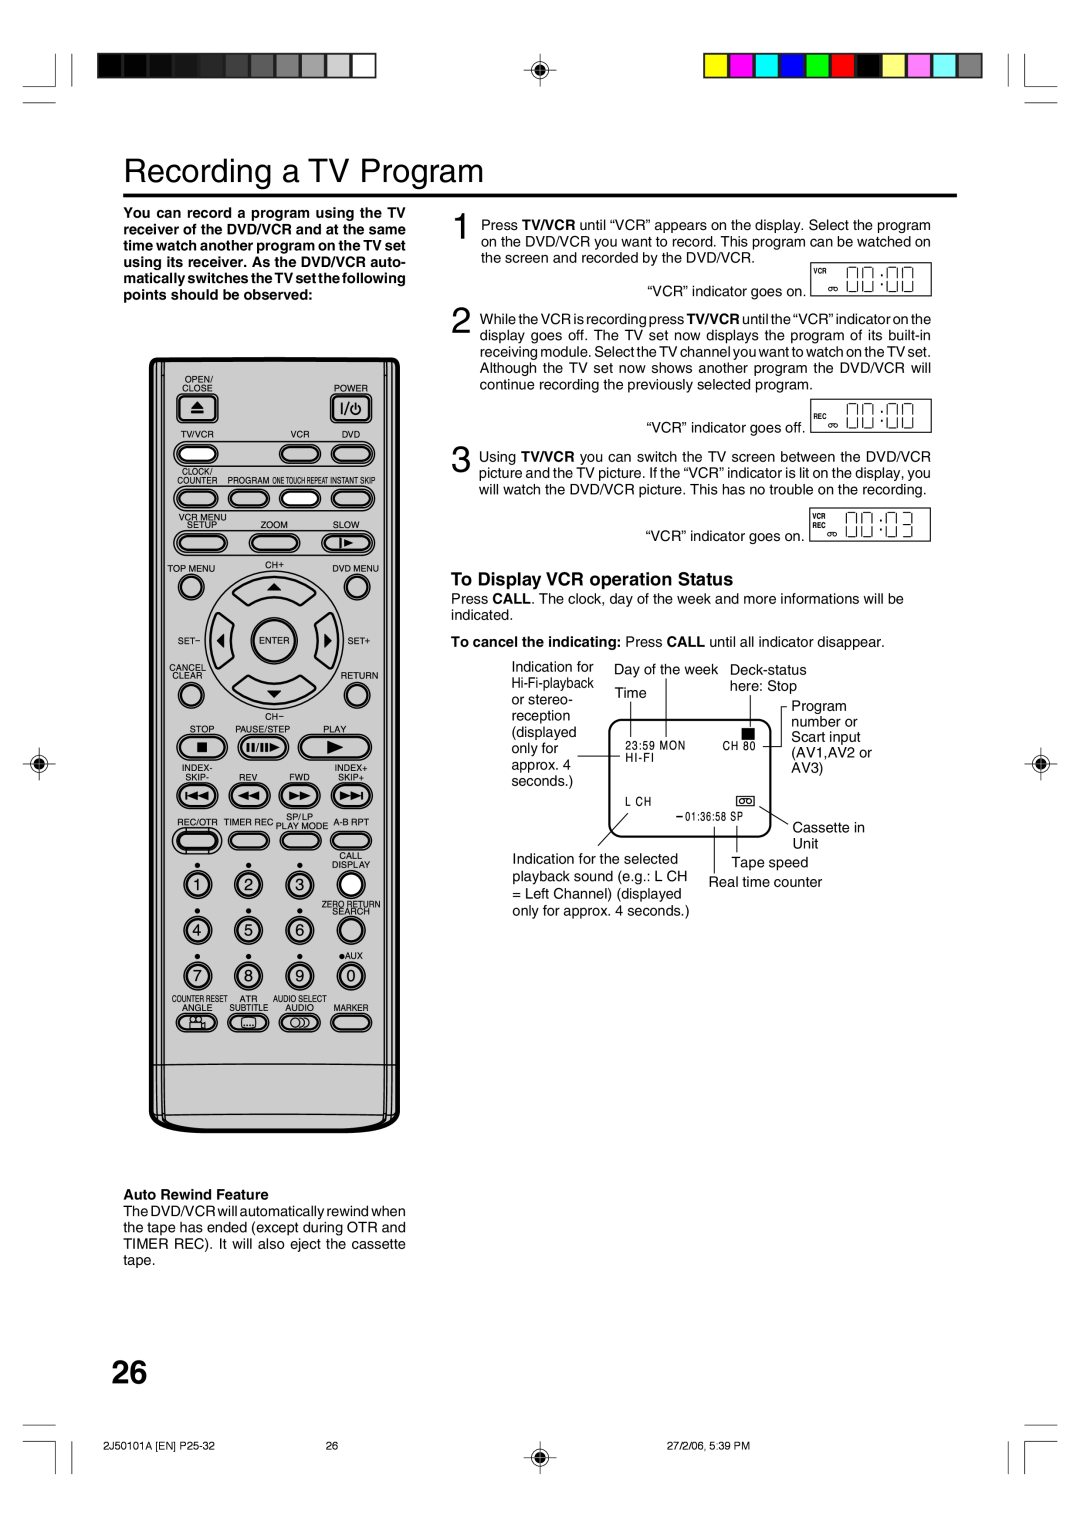 Toshiba SD-37VBSB manual Recording a TV Program, To Display VCR operation Status, Auto Rewind Feature 